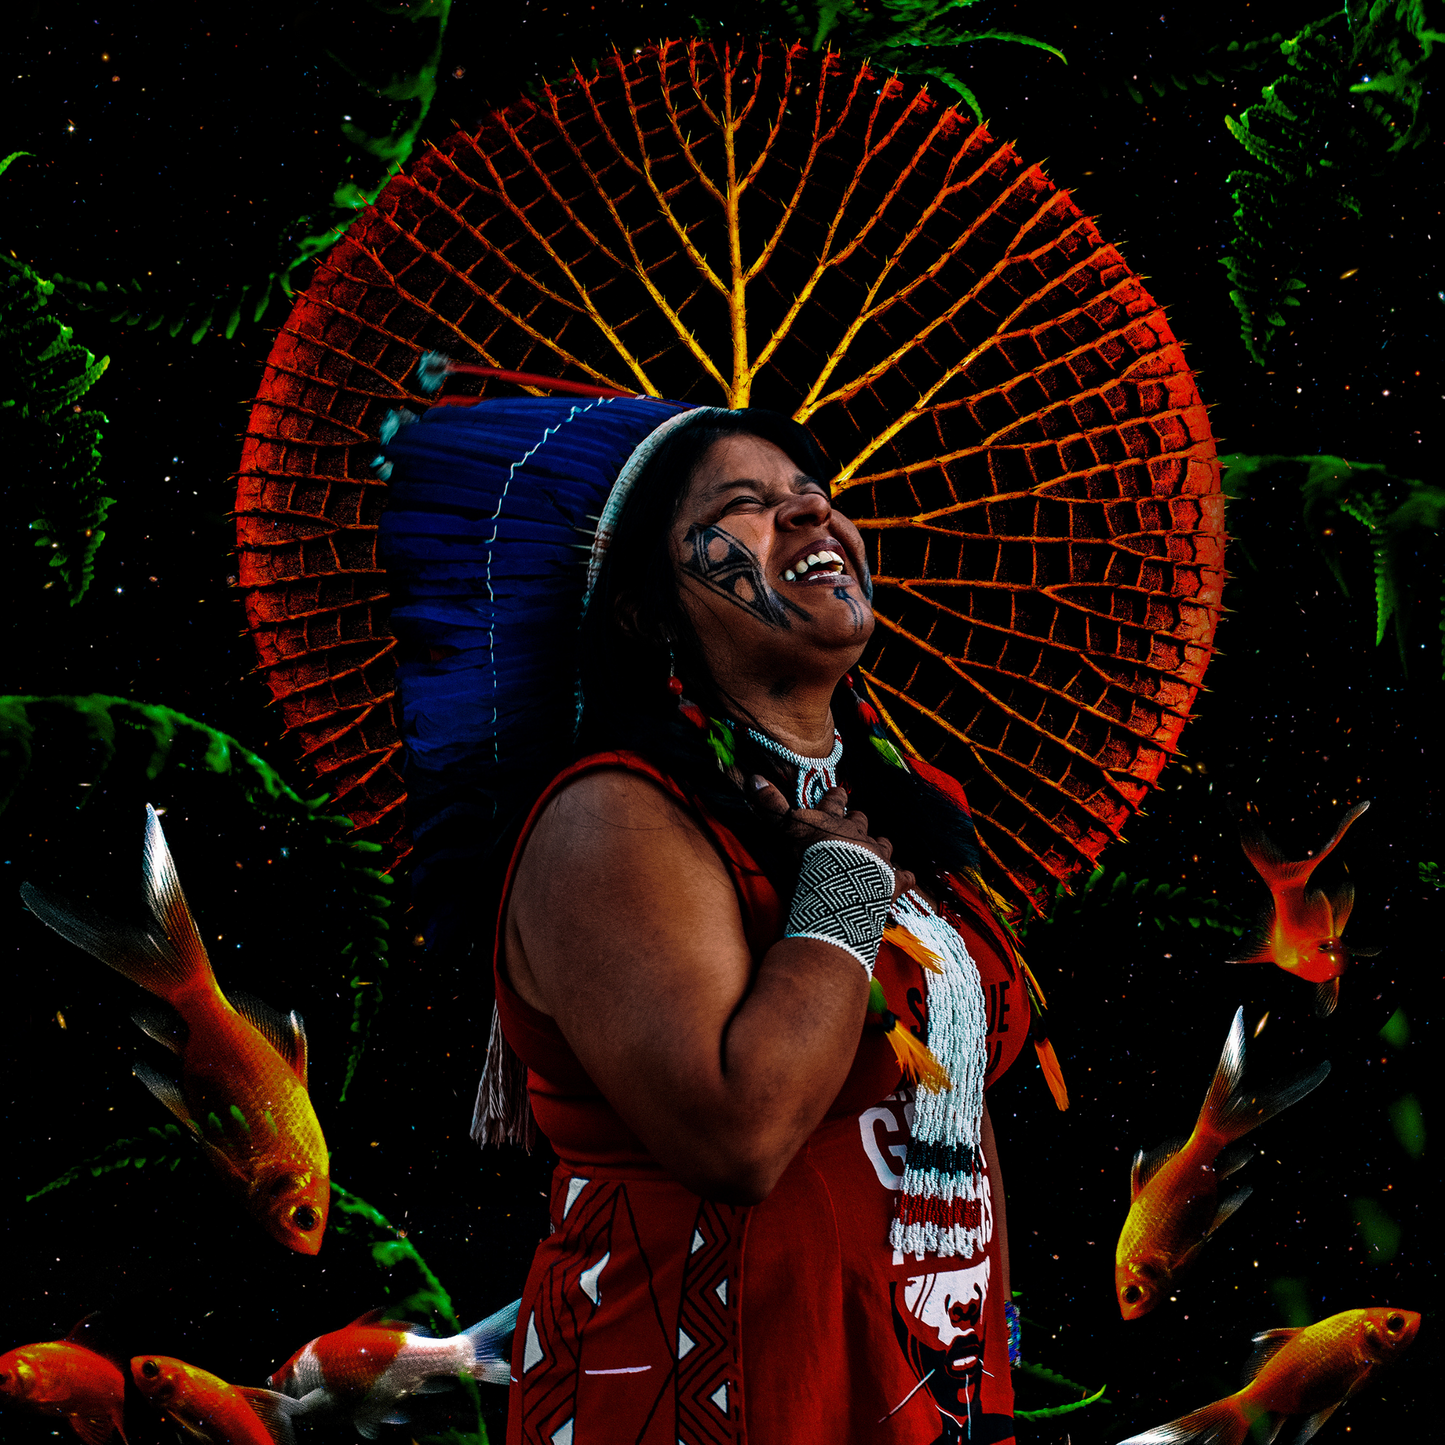 This is an image that shows an Indigenous Brazilian woman dressed in a traditional dress and headdress, facing up and smiling. In the background there are large wild leaves and a few fish towards the bottom.